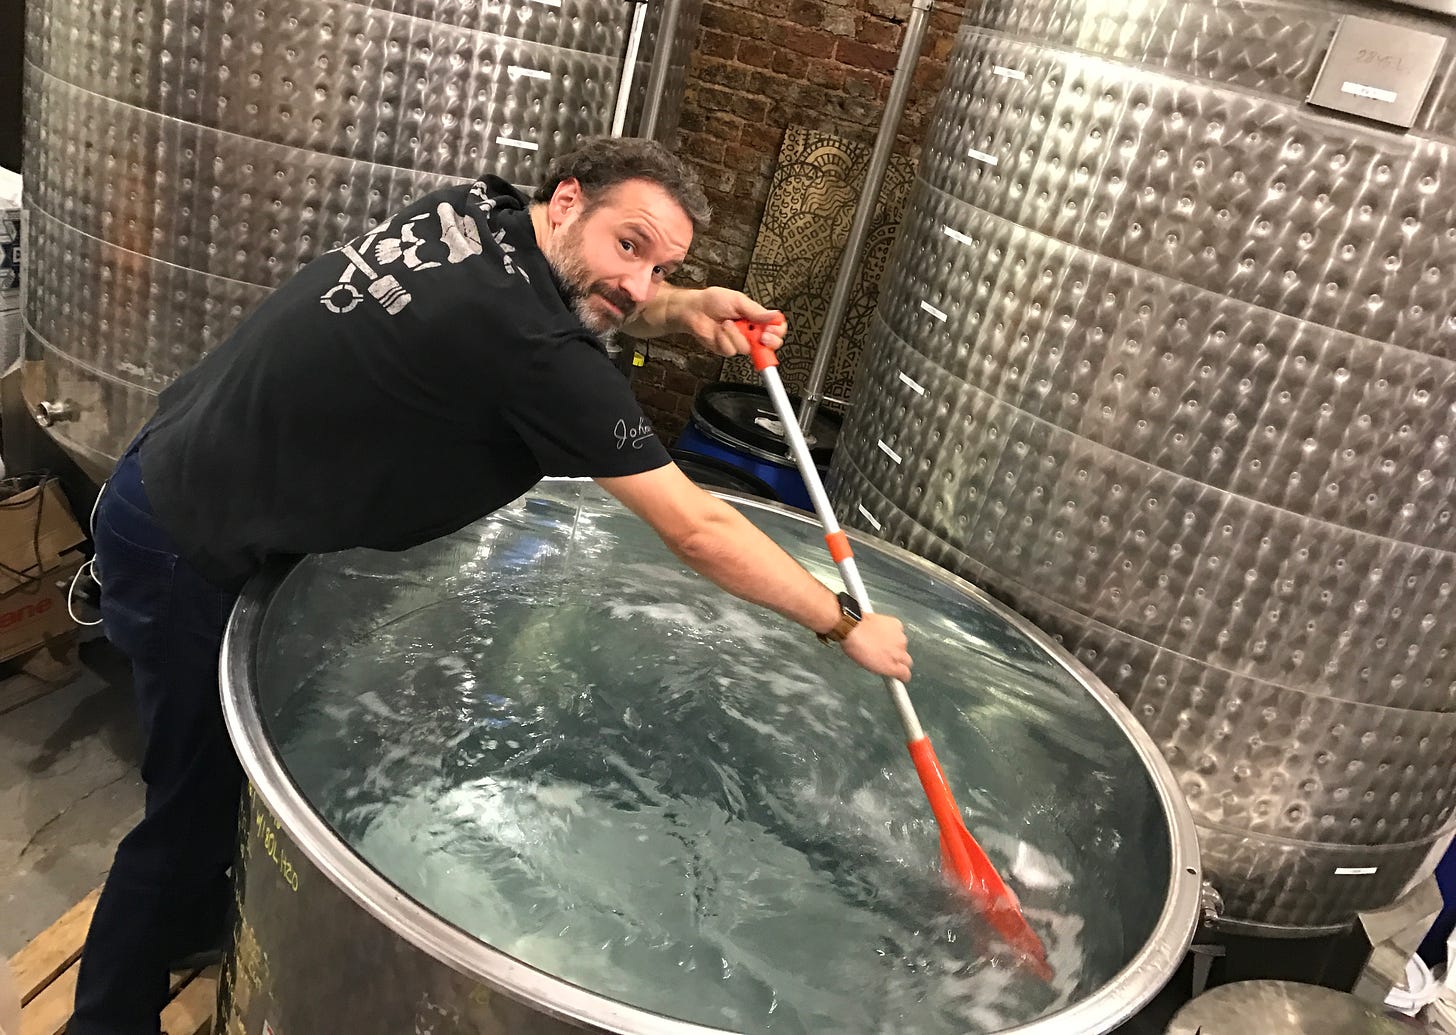 While at the London distillery, I was asked to help out by stirring a vat of gin with a canoe paddle.